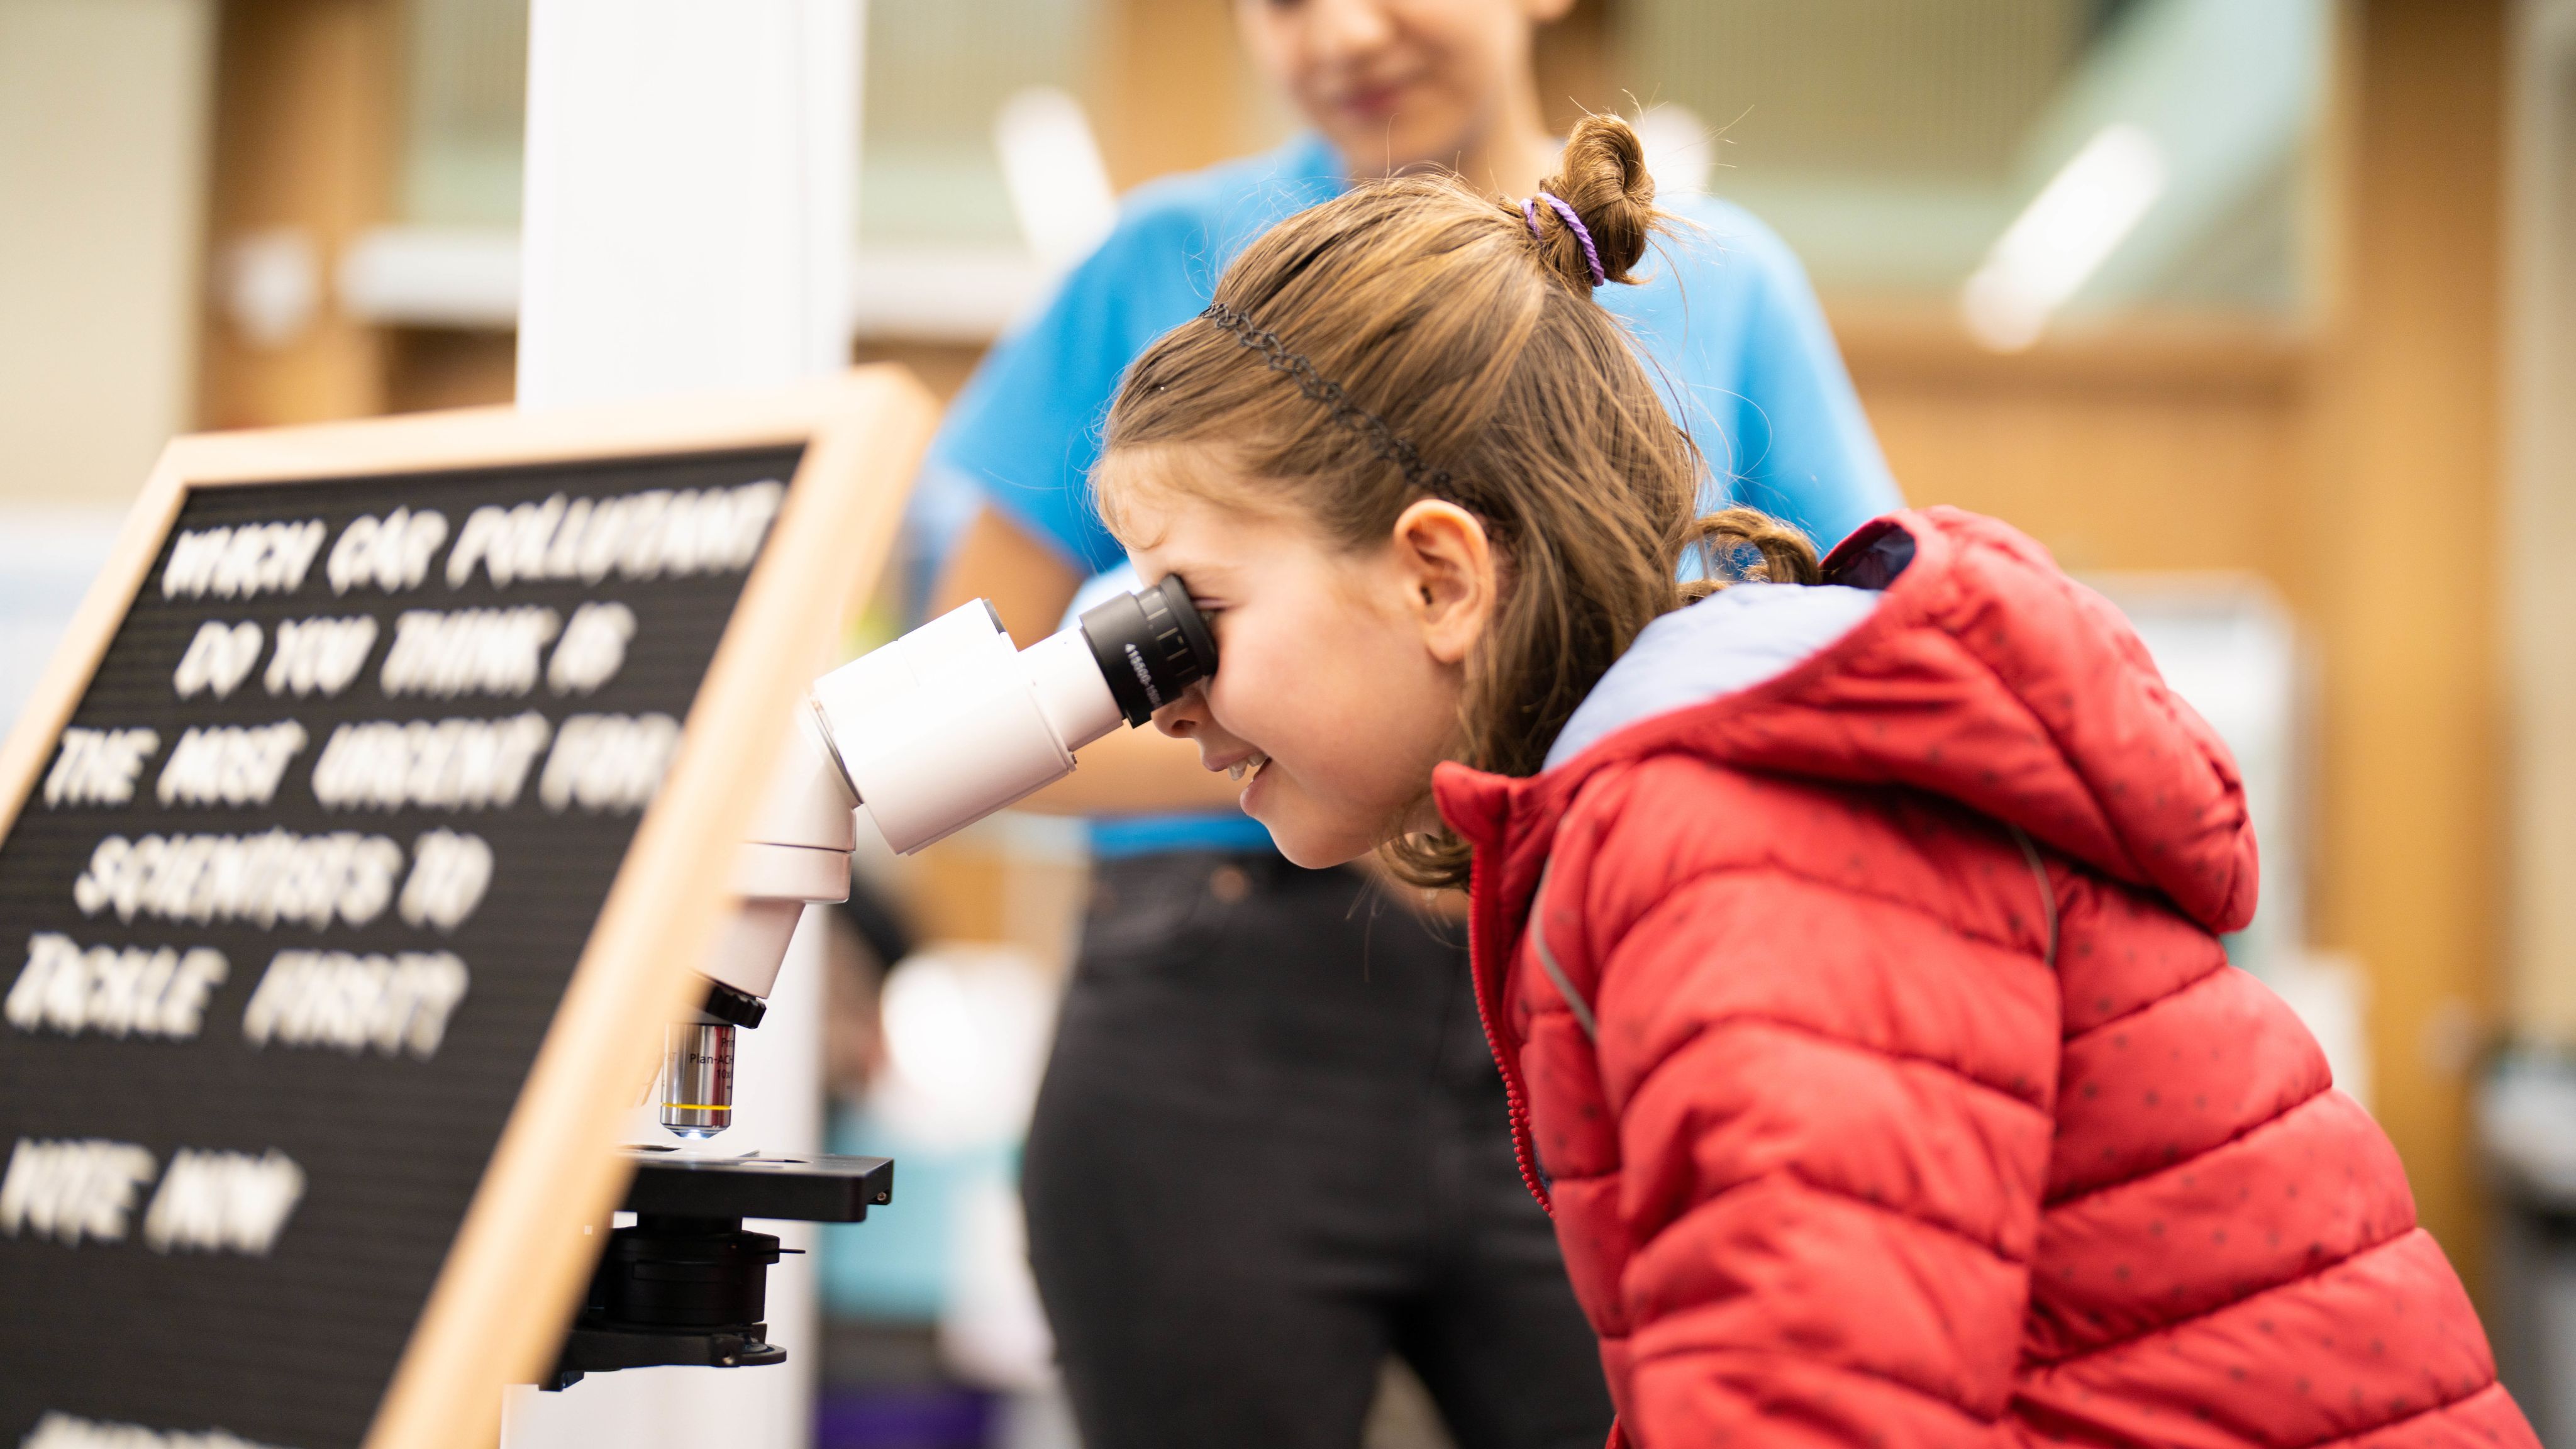 A young girl looks through a microscope